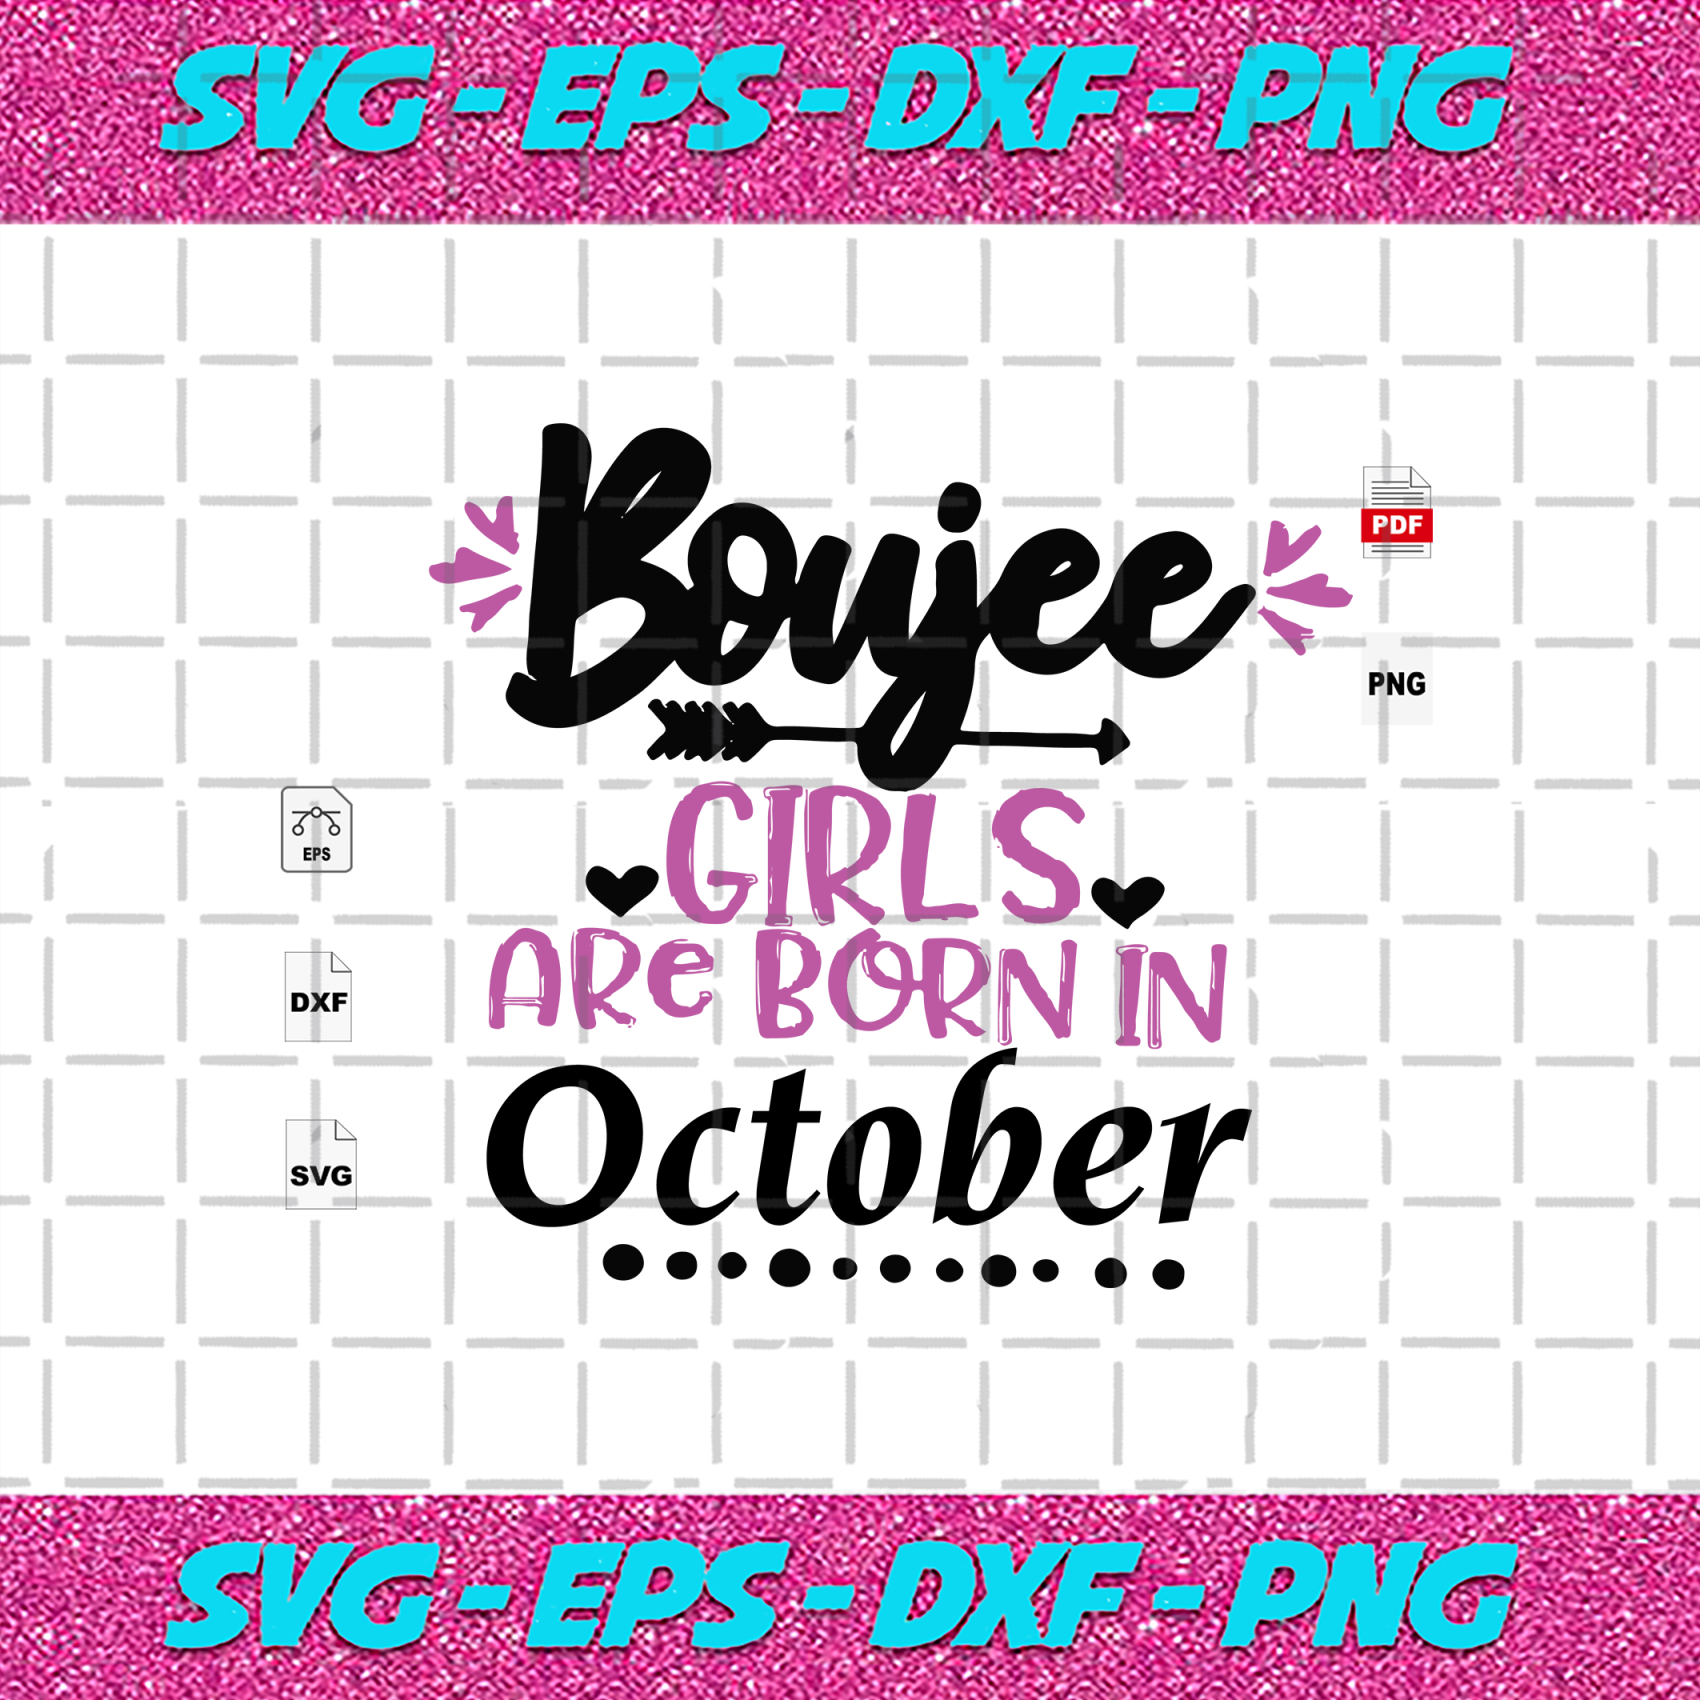 Download Girls Are Born In October October Birthday Svg October Girl Boujee Birthday Birthday In August October Svg Boujee Shirts Born In August October Shirts Birthday Girl October Birthday Gift Birthday Gift Svg